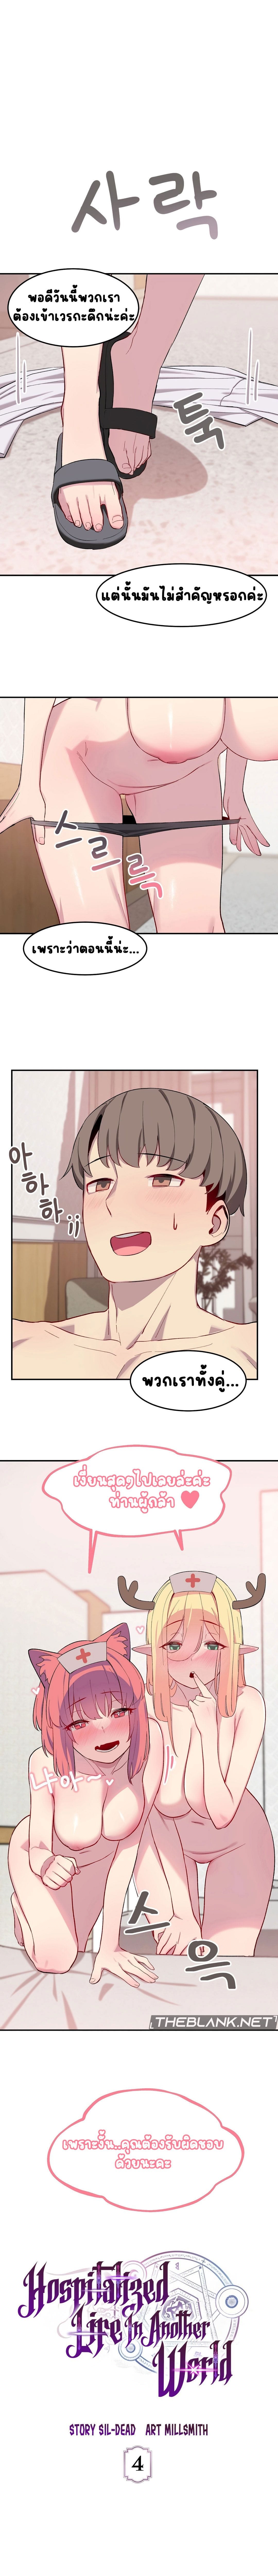 Hospitalized Life in Another World ตอนที่ 4 ภาพ 0